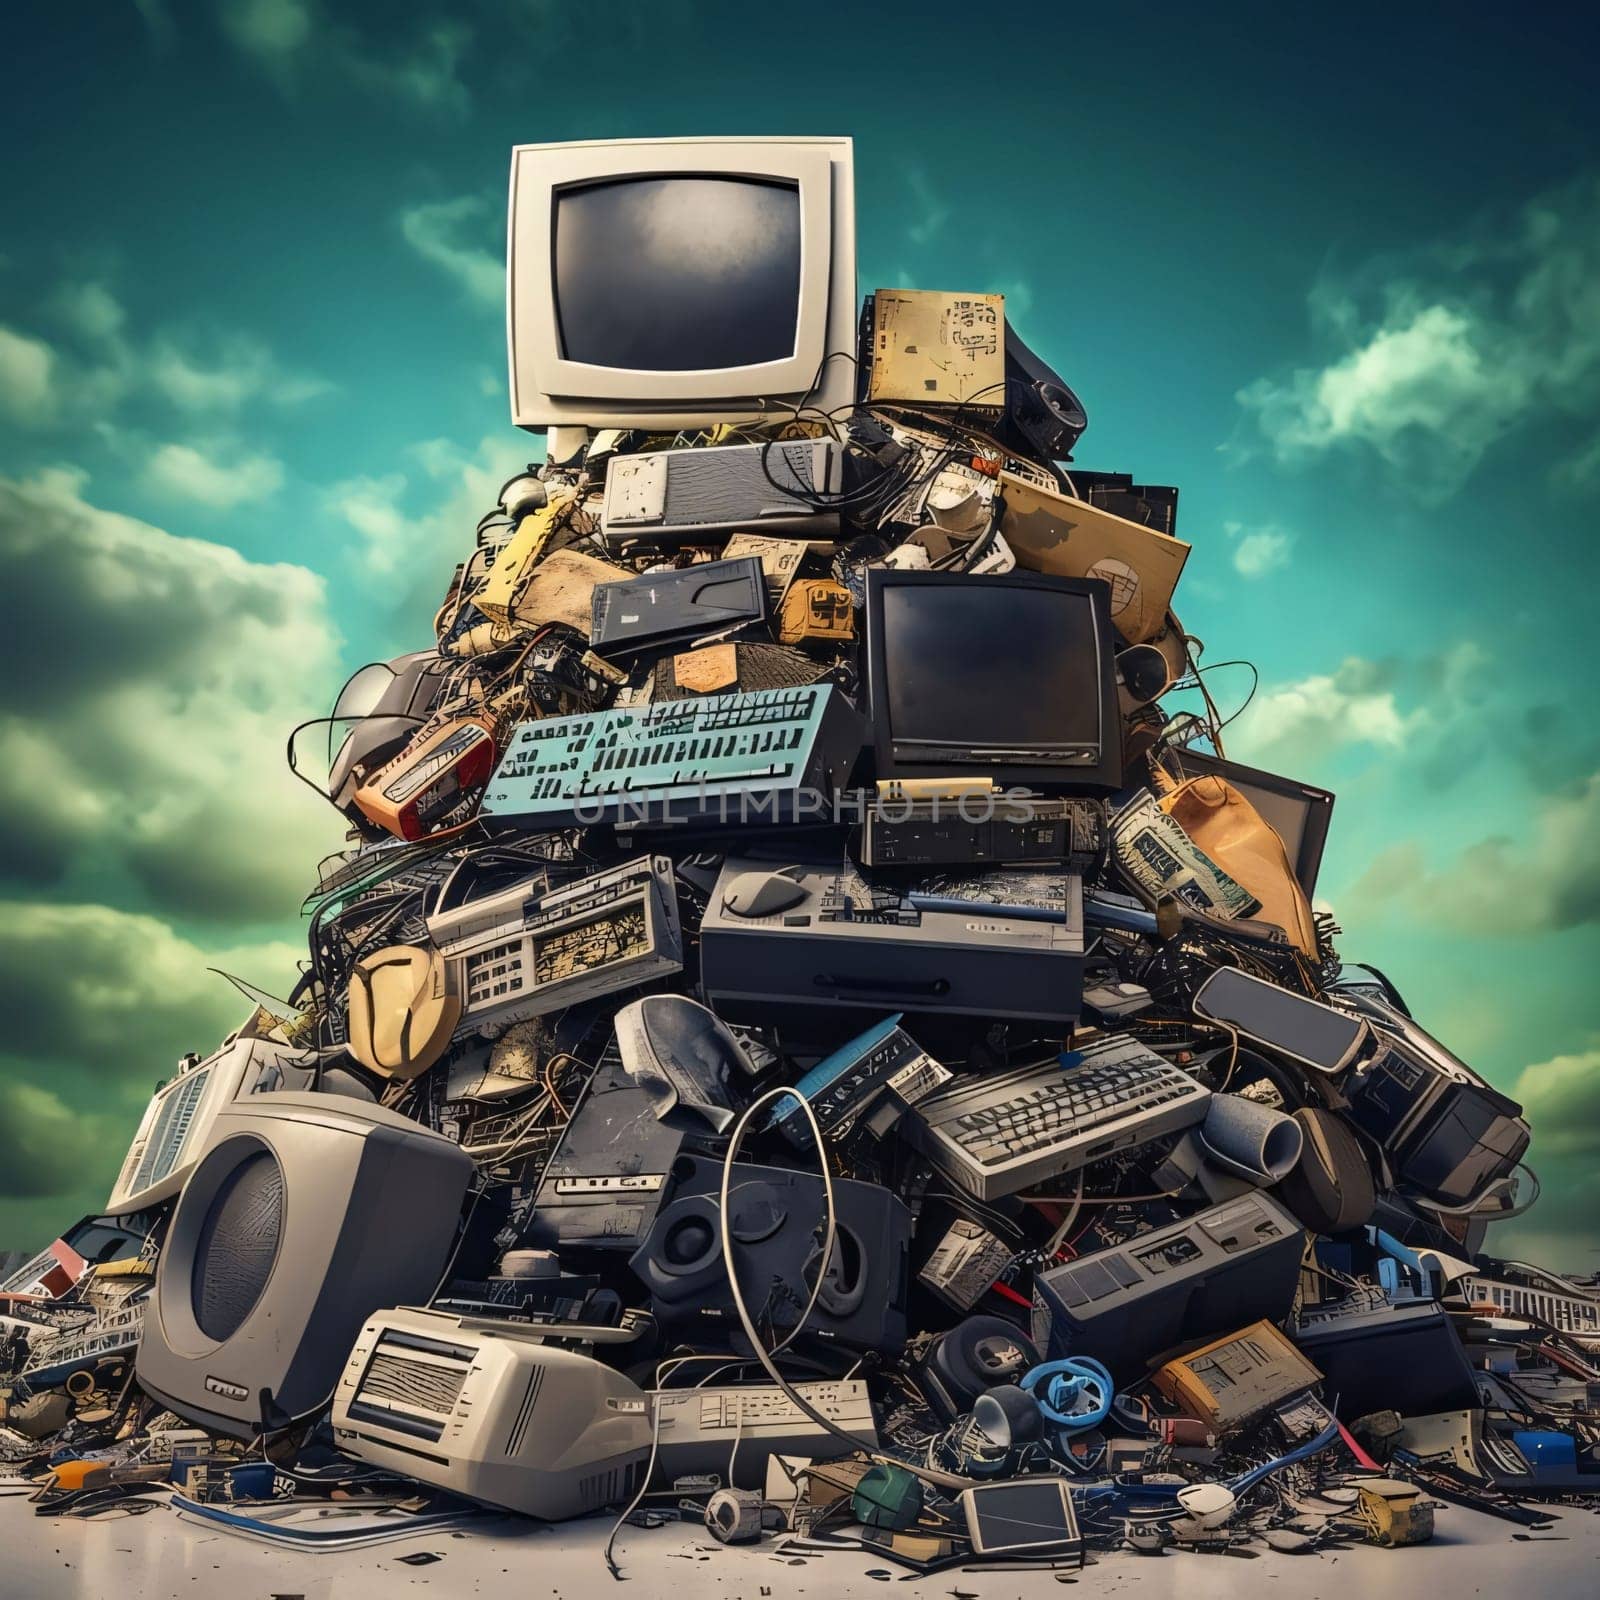 Earth Day: Pile of old television and other electronic devices on a sky background